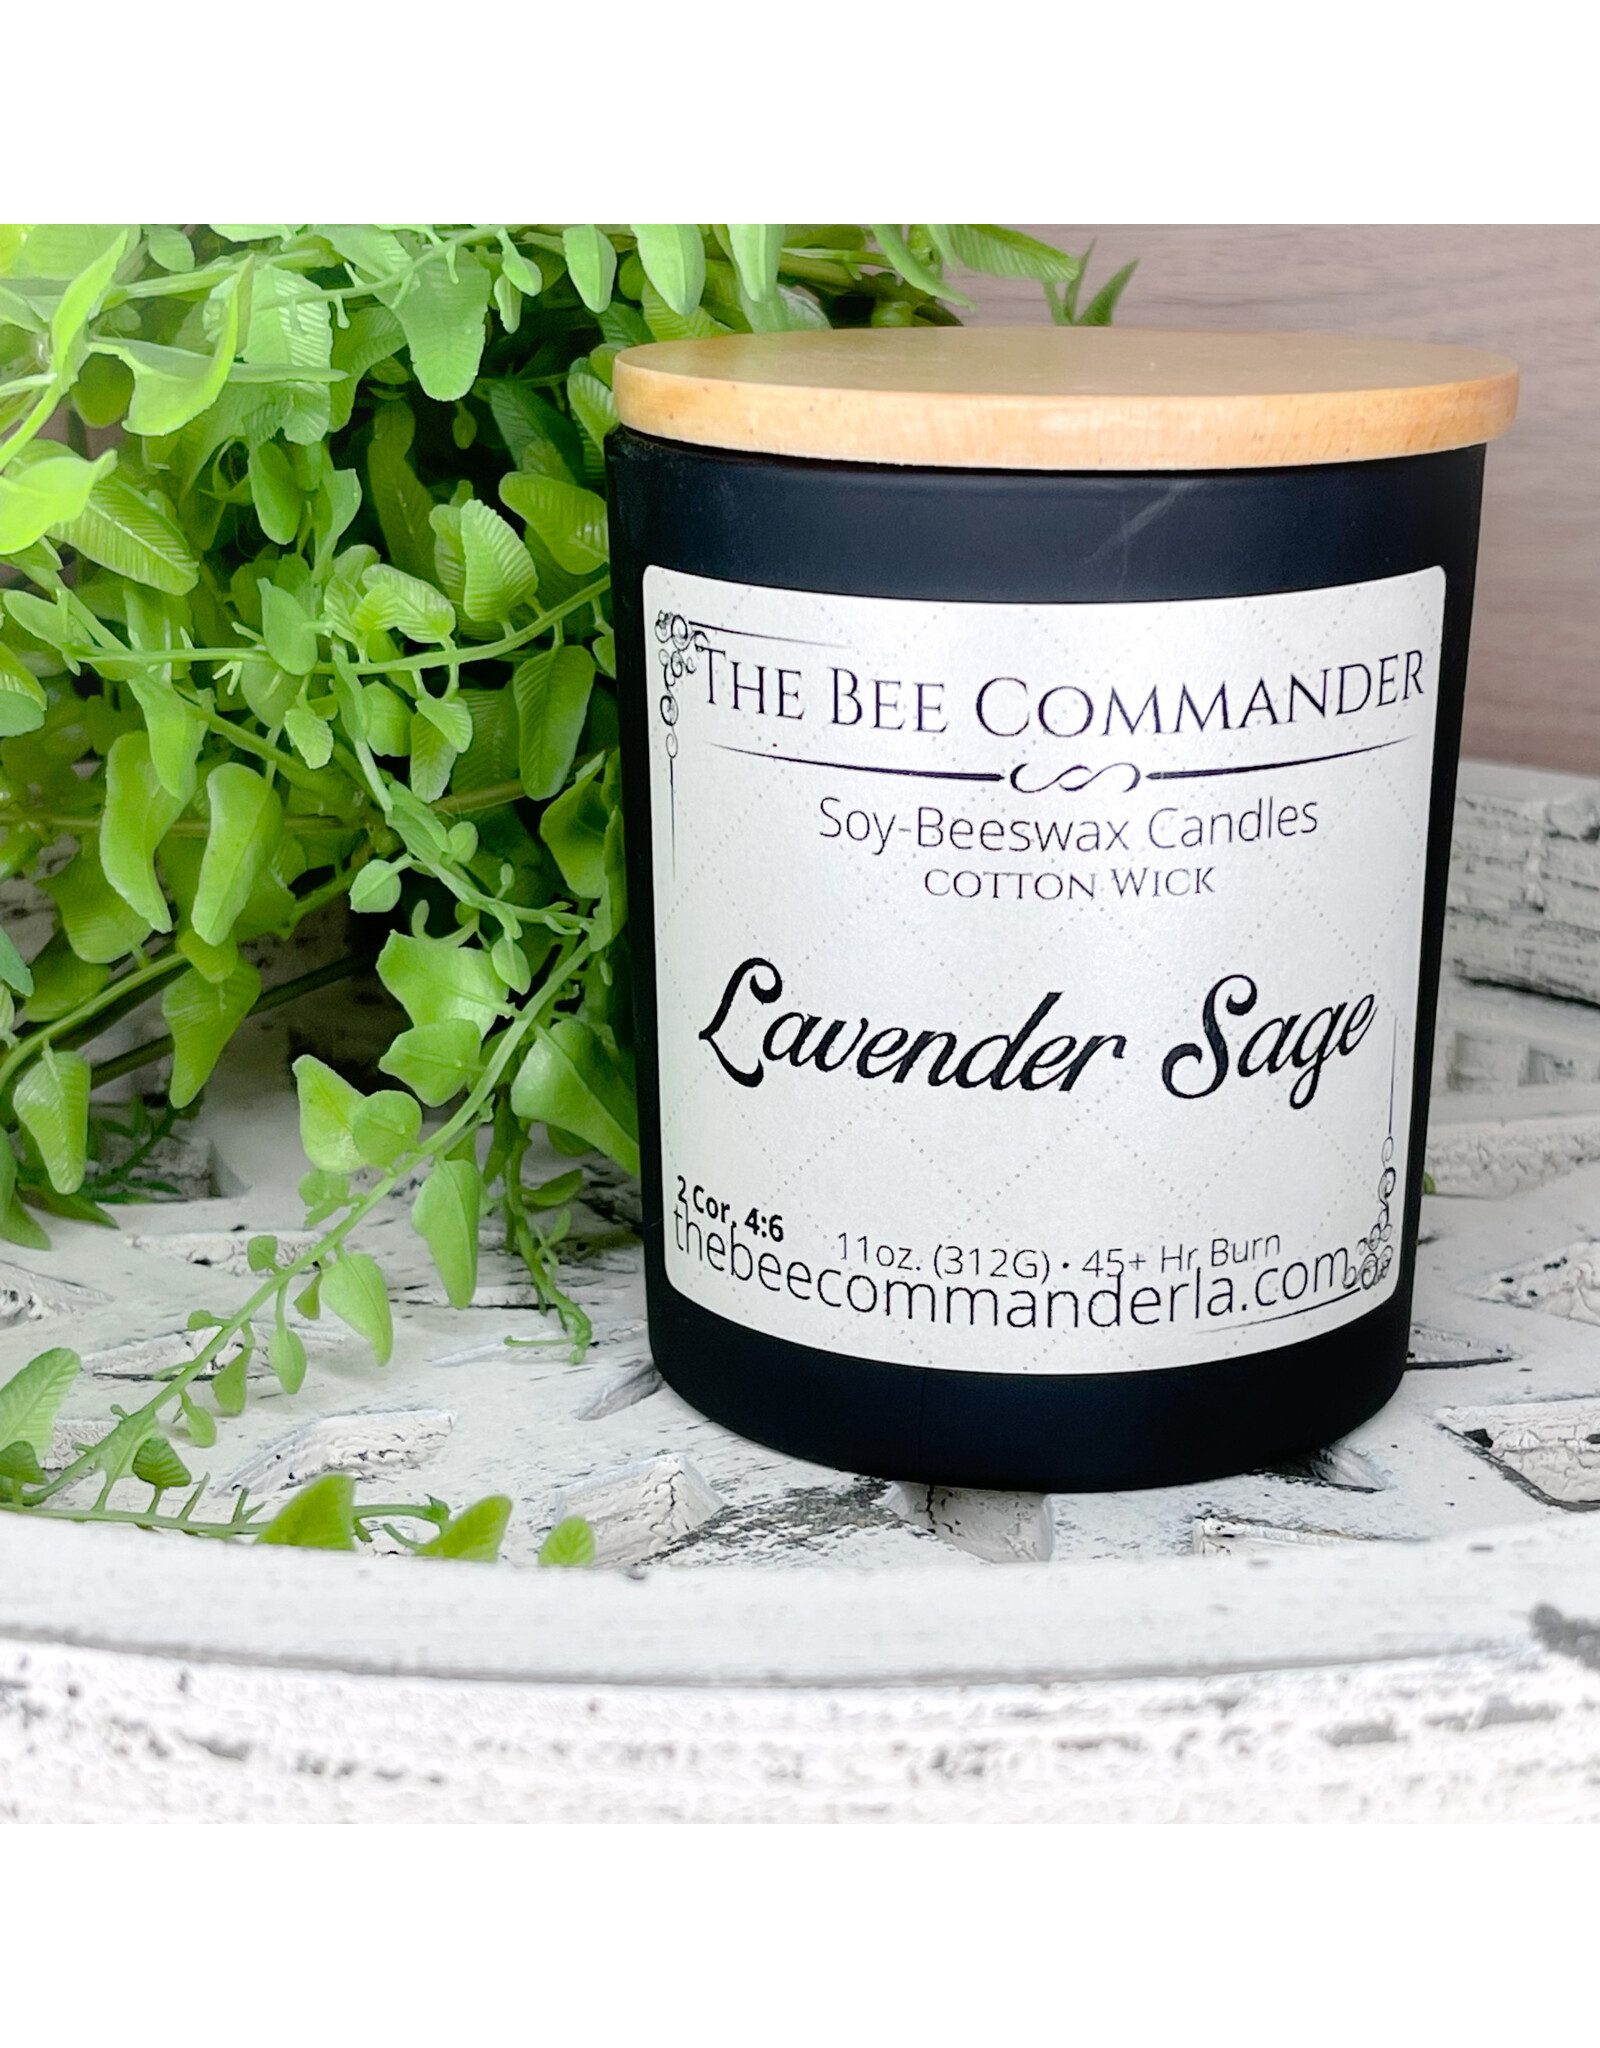 The Bee Commander Lavender Sage Soy/Beeswax Candle